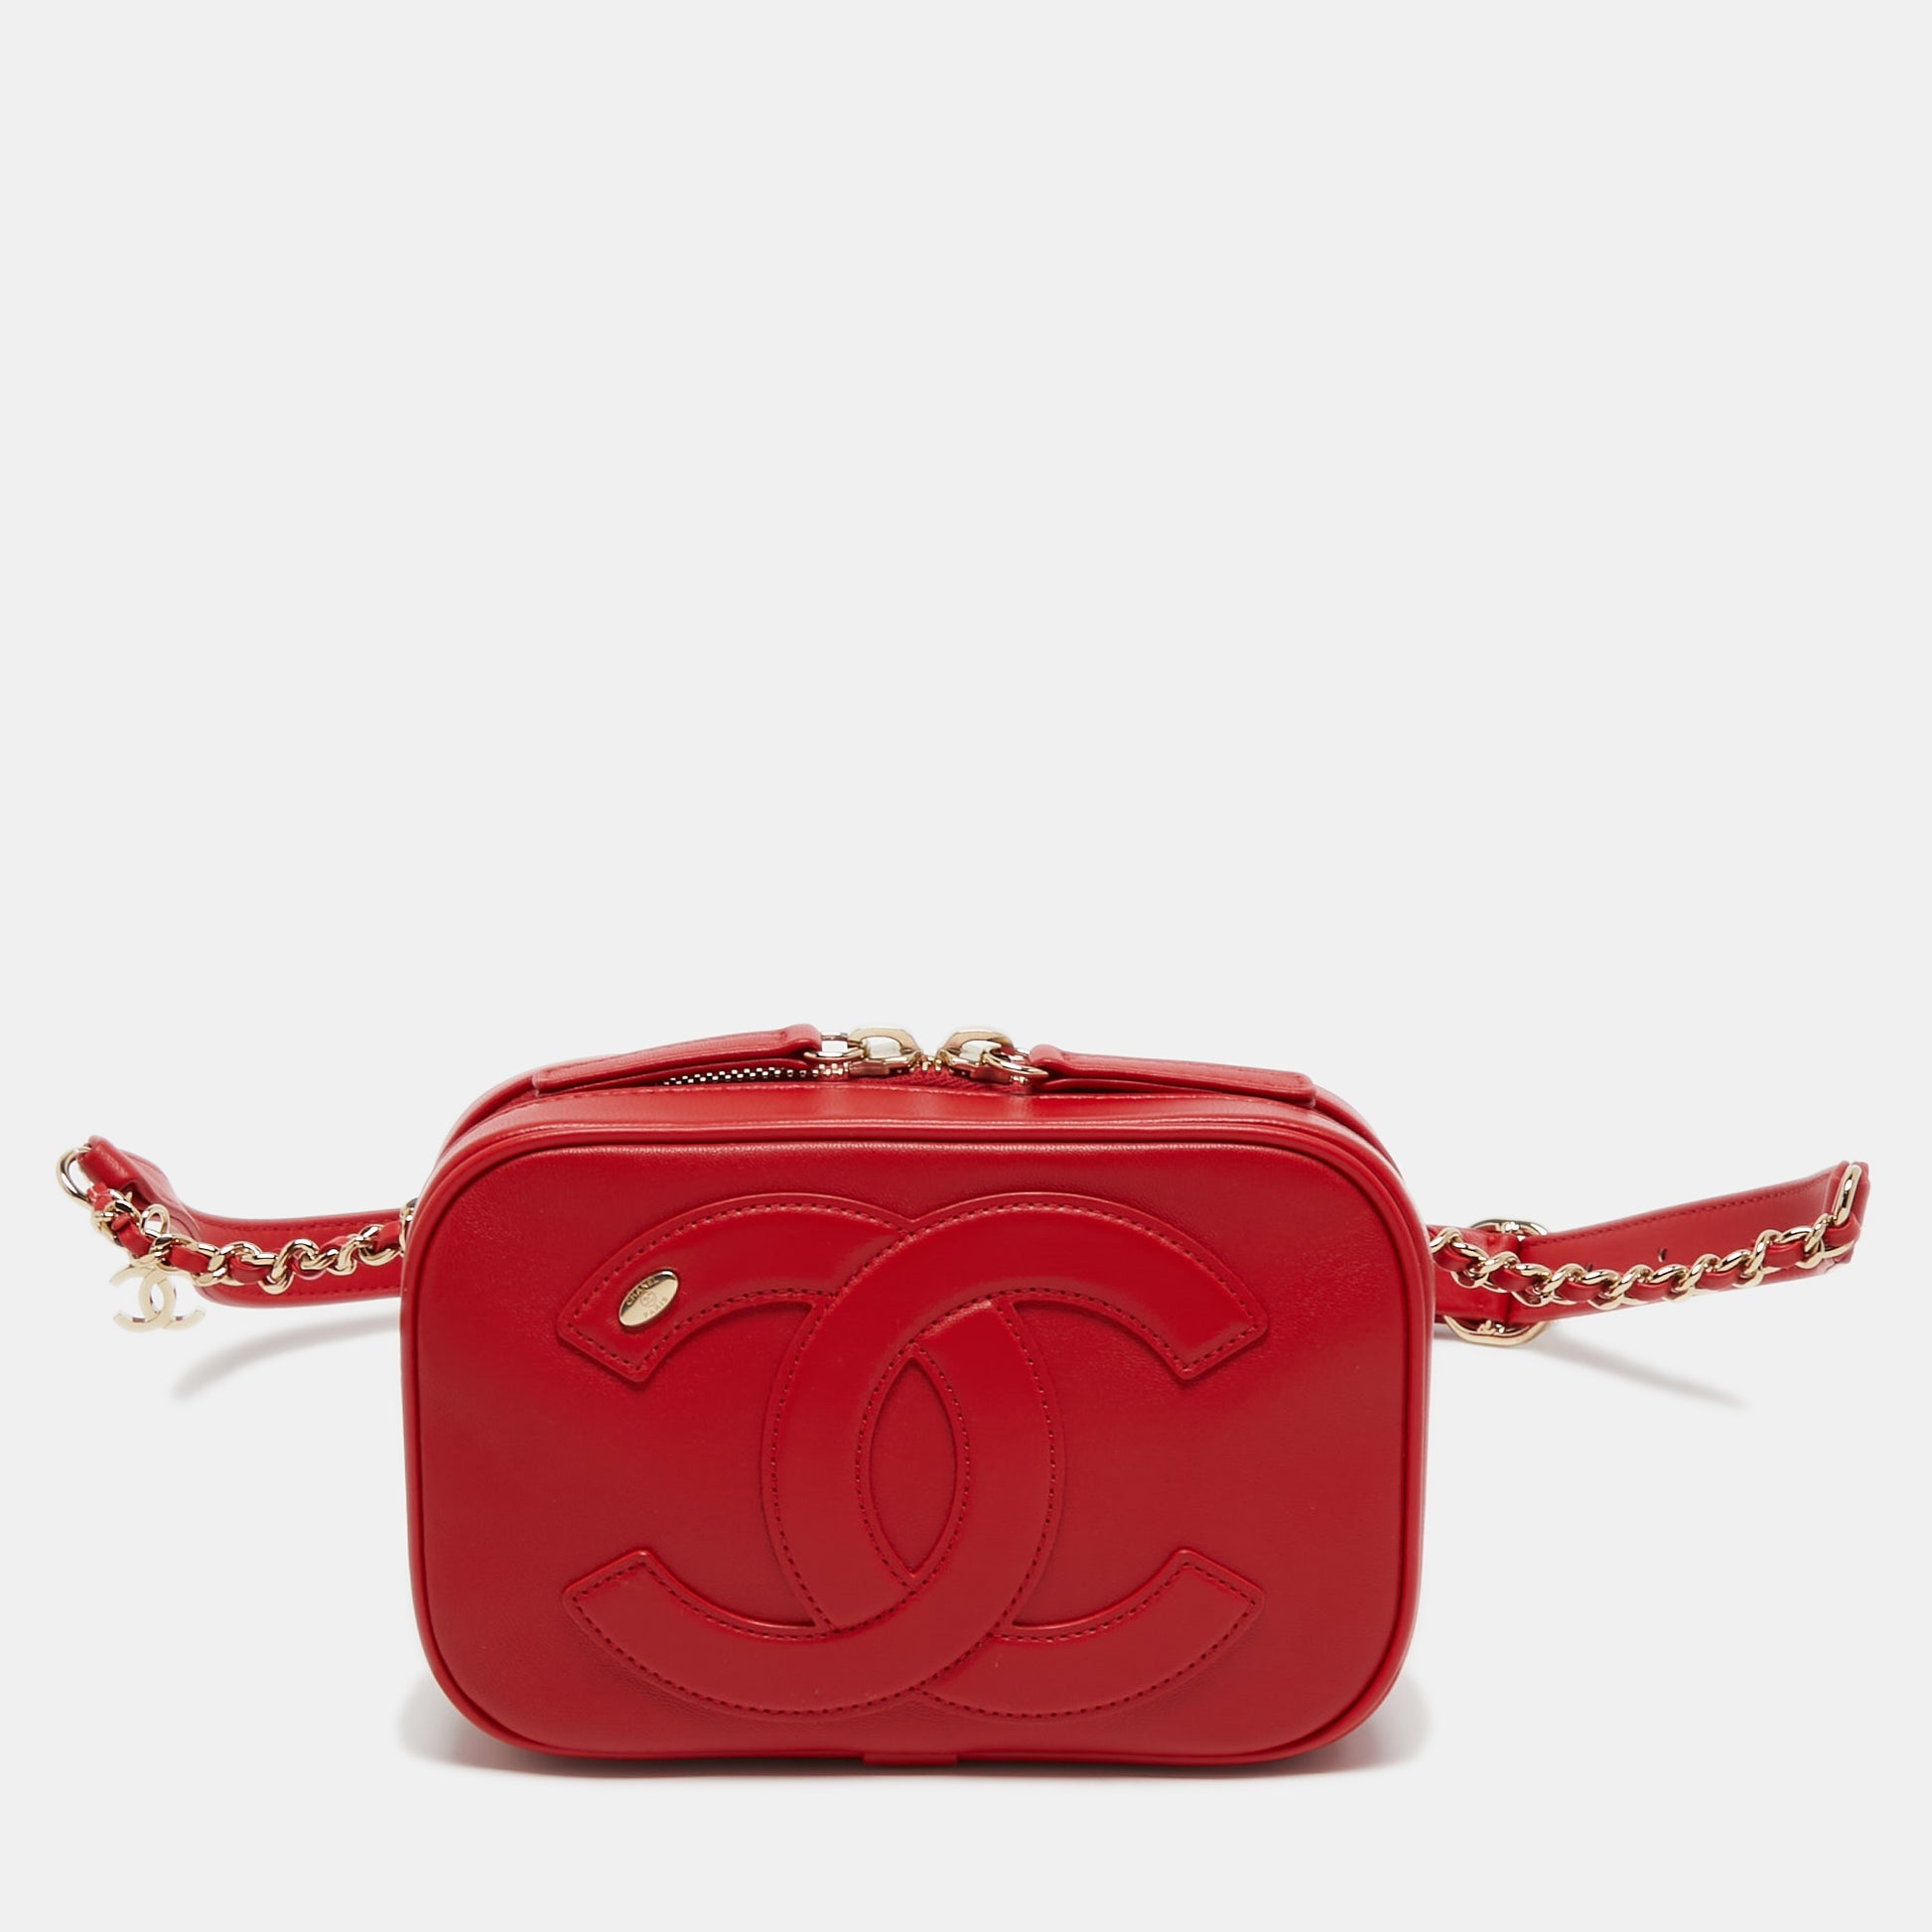 Chanel Red Leather CC Mania Waist Bag Chanel